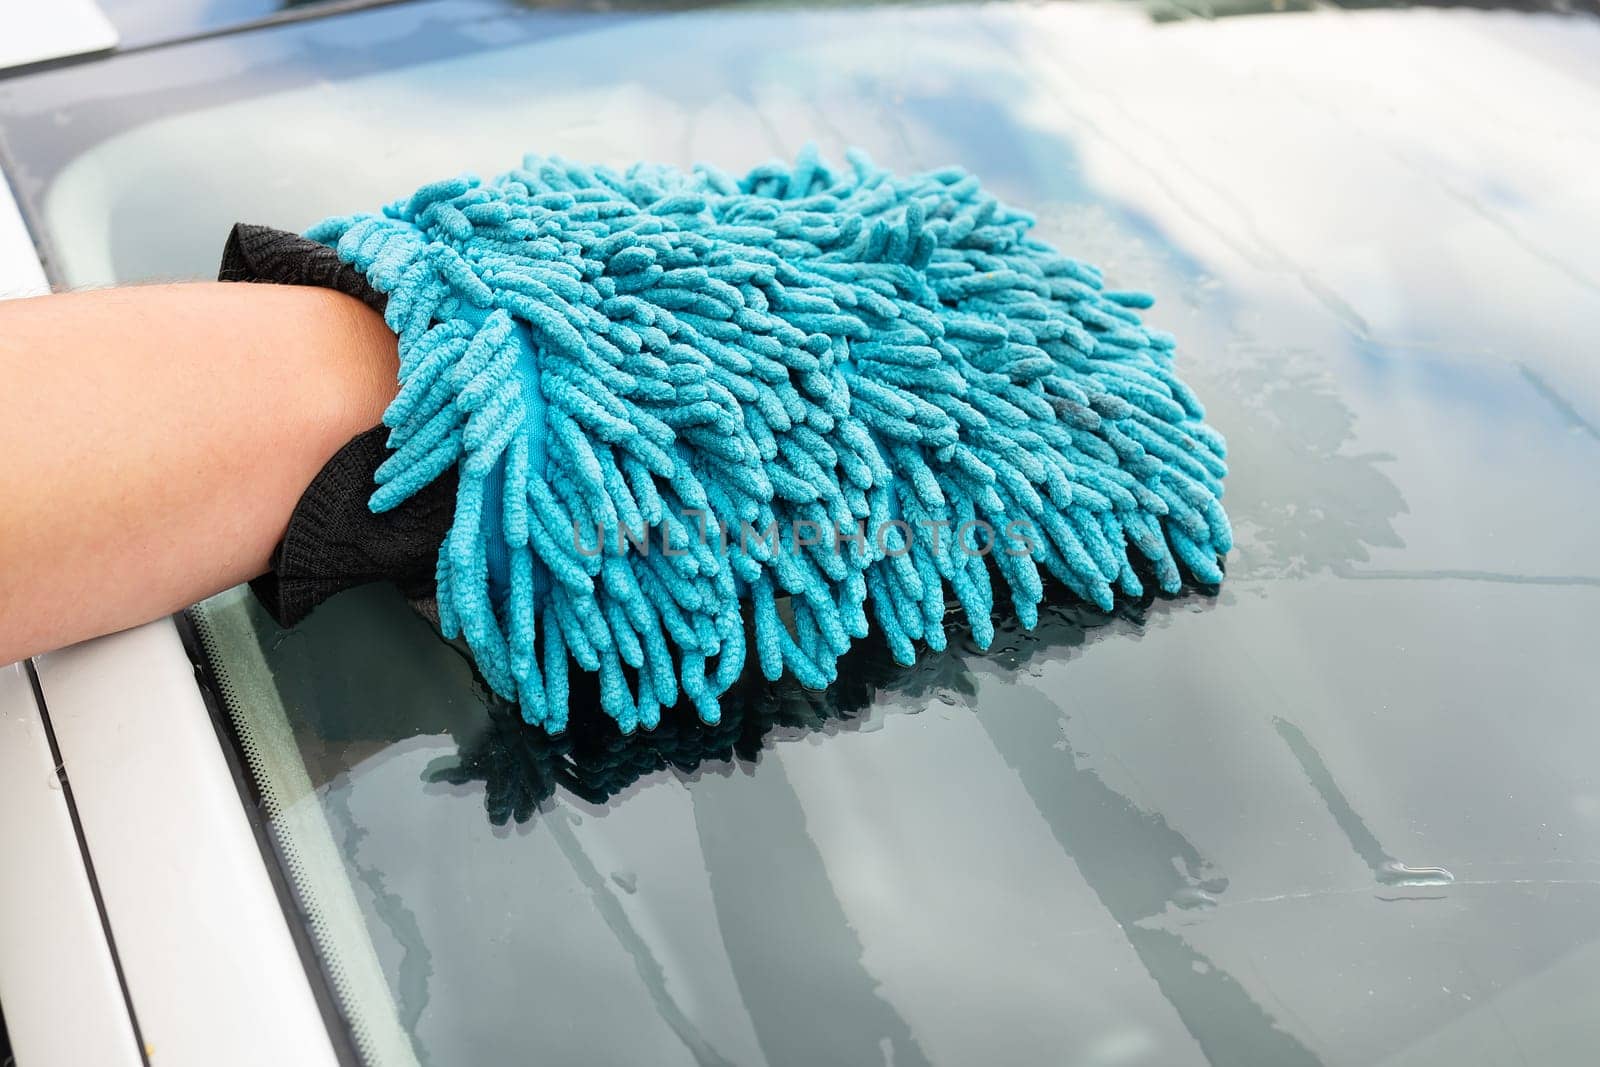 A man washes the car windshield with a large blue washcloth. Car wash, self-service. by sfinks